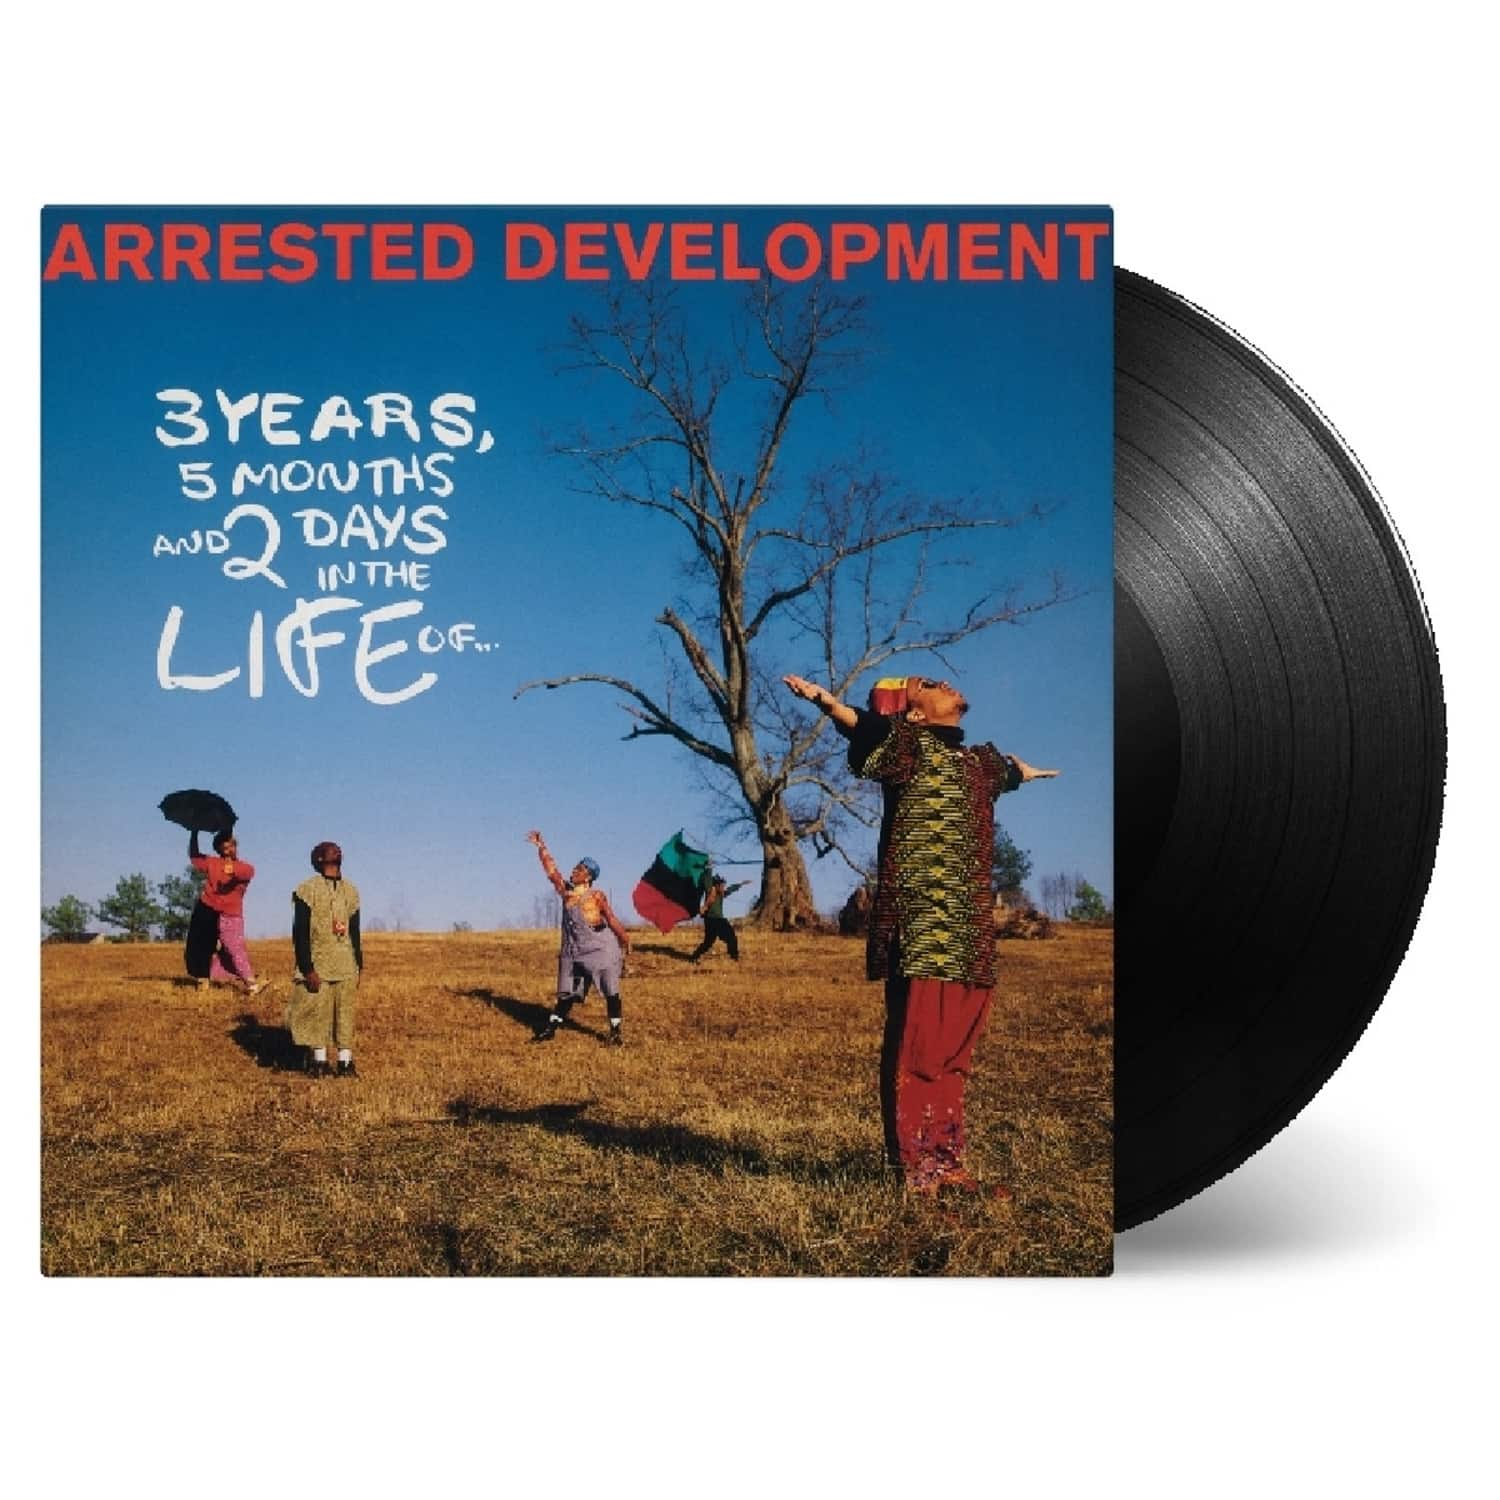 Arrested Development - 3 YEARS, 5 MONTHS & 2 MONTHS AND 2 DAYS IN THE LIFE OF ... 